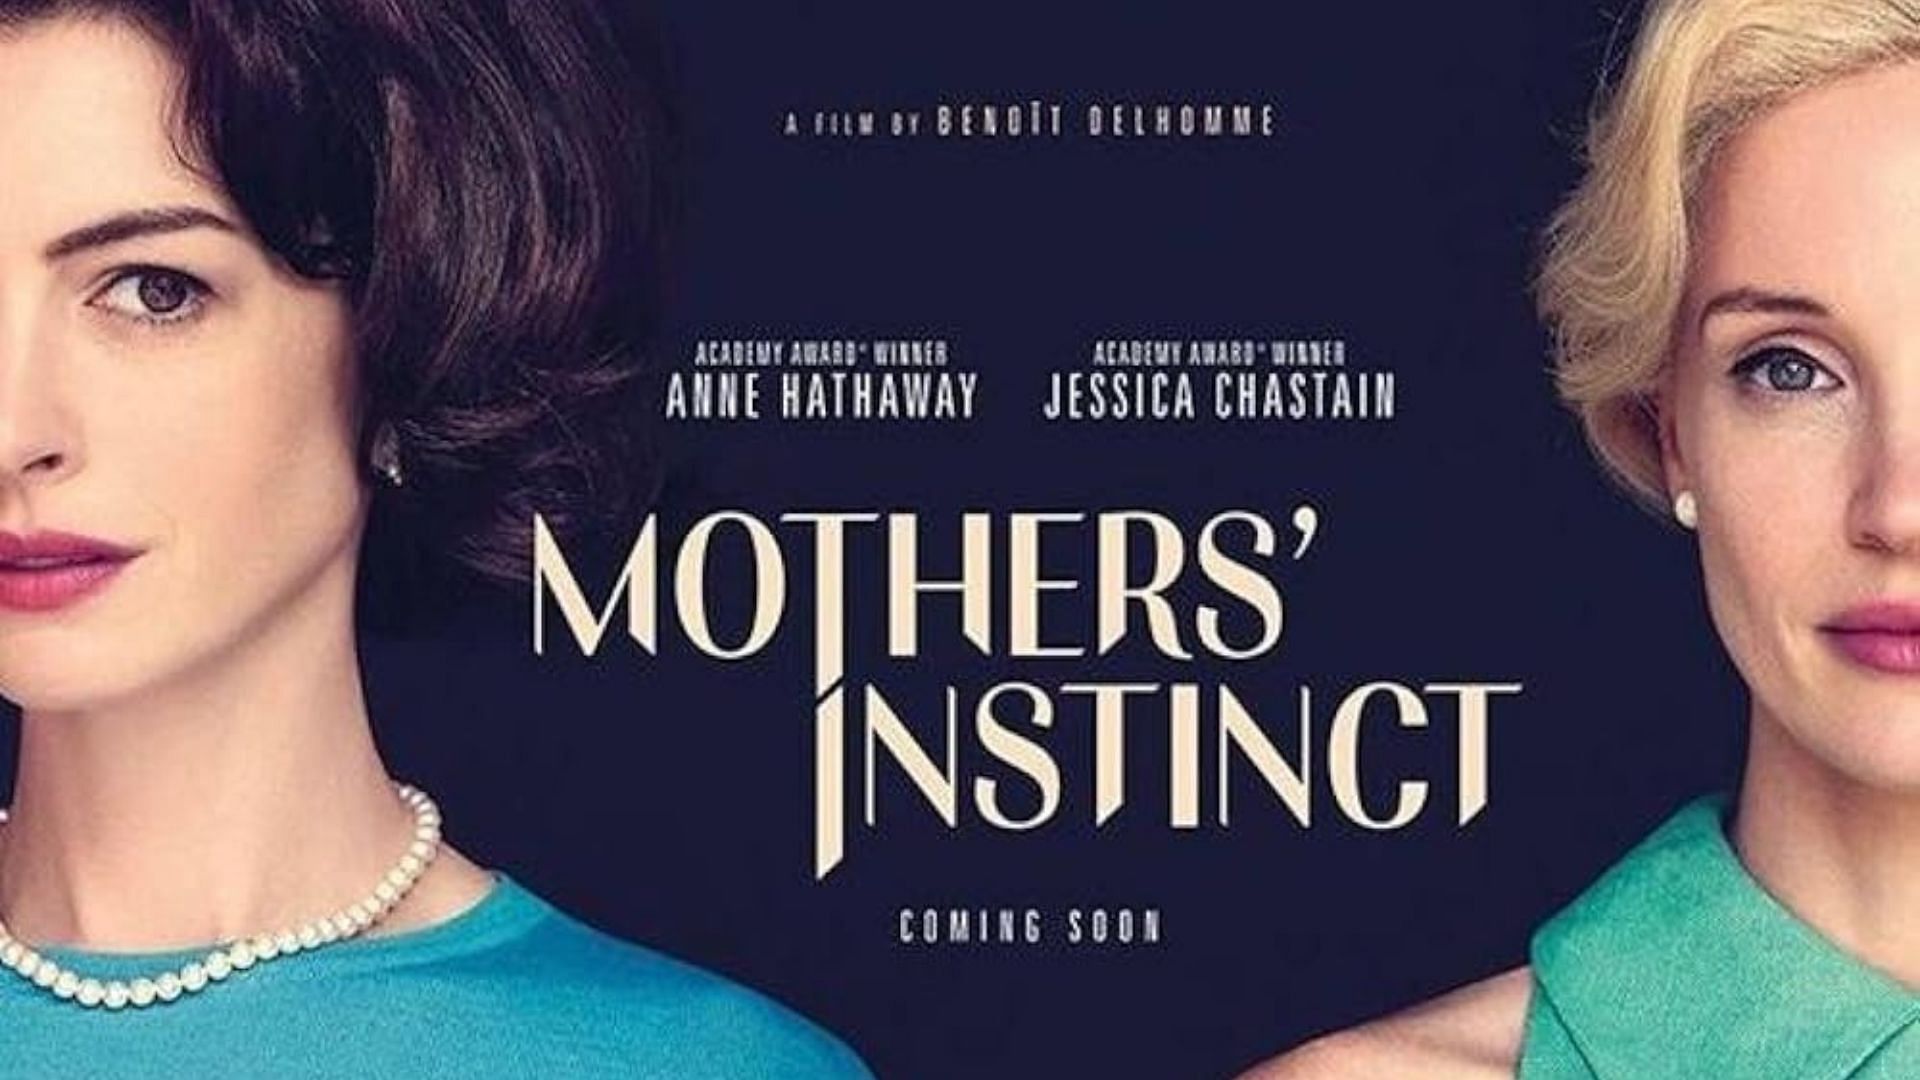 Mother's Instinct trailer 3 things we learned about the Anne Hathaway